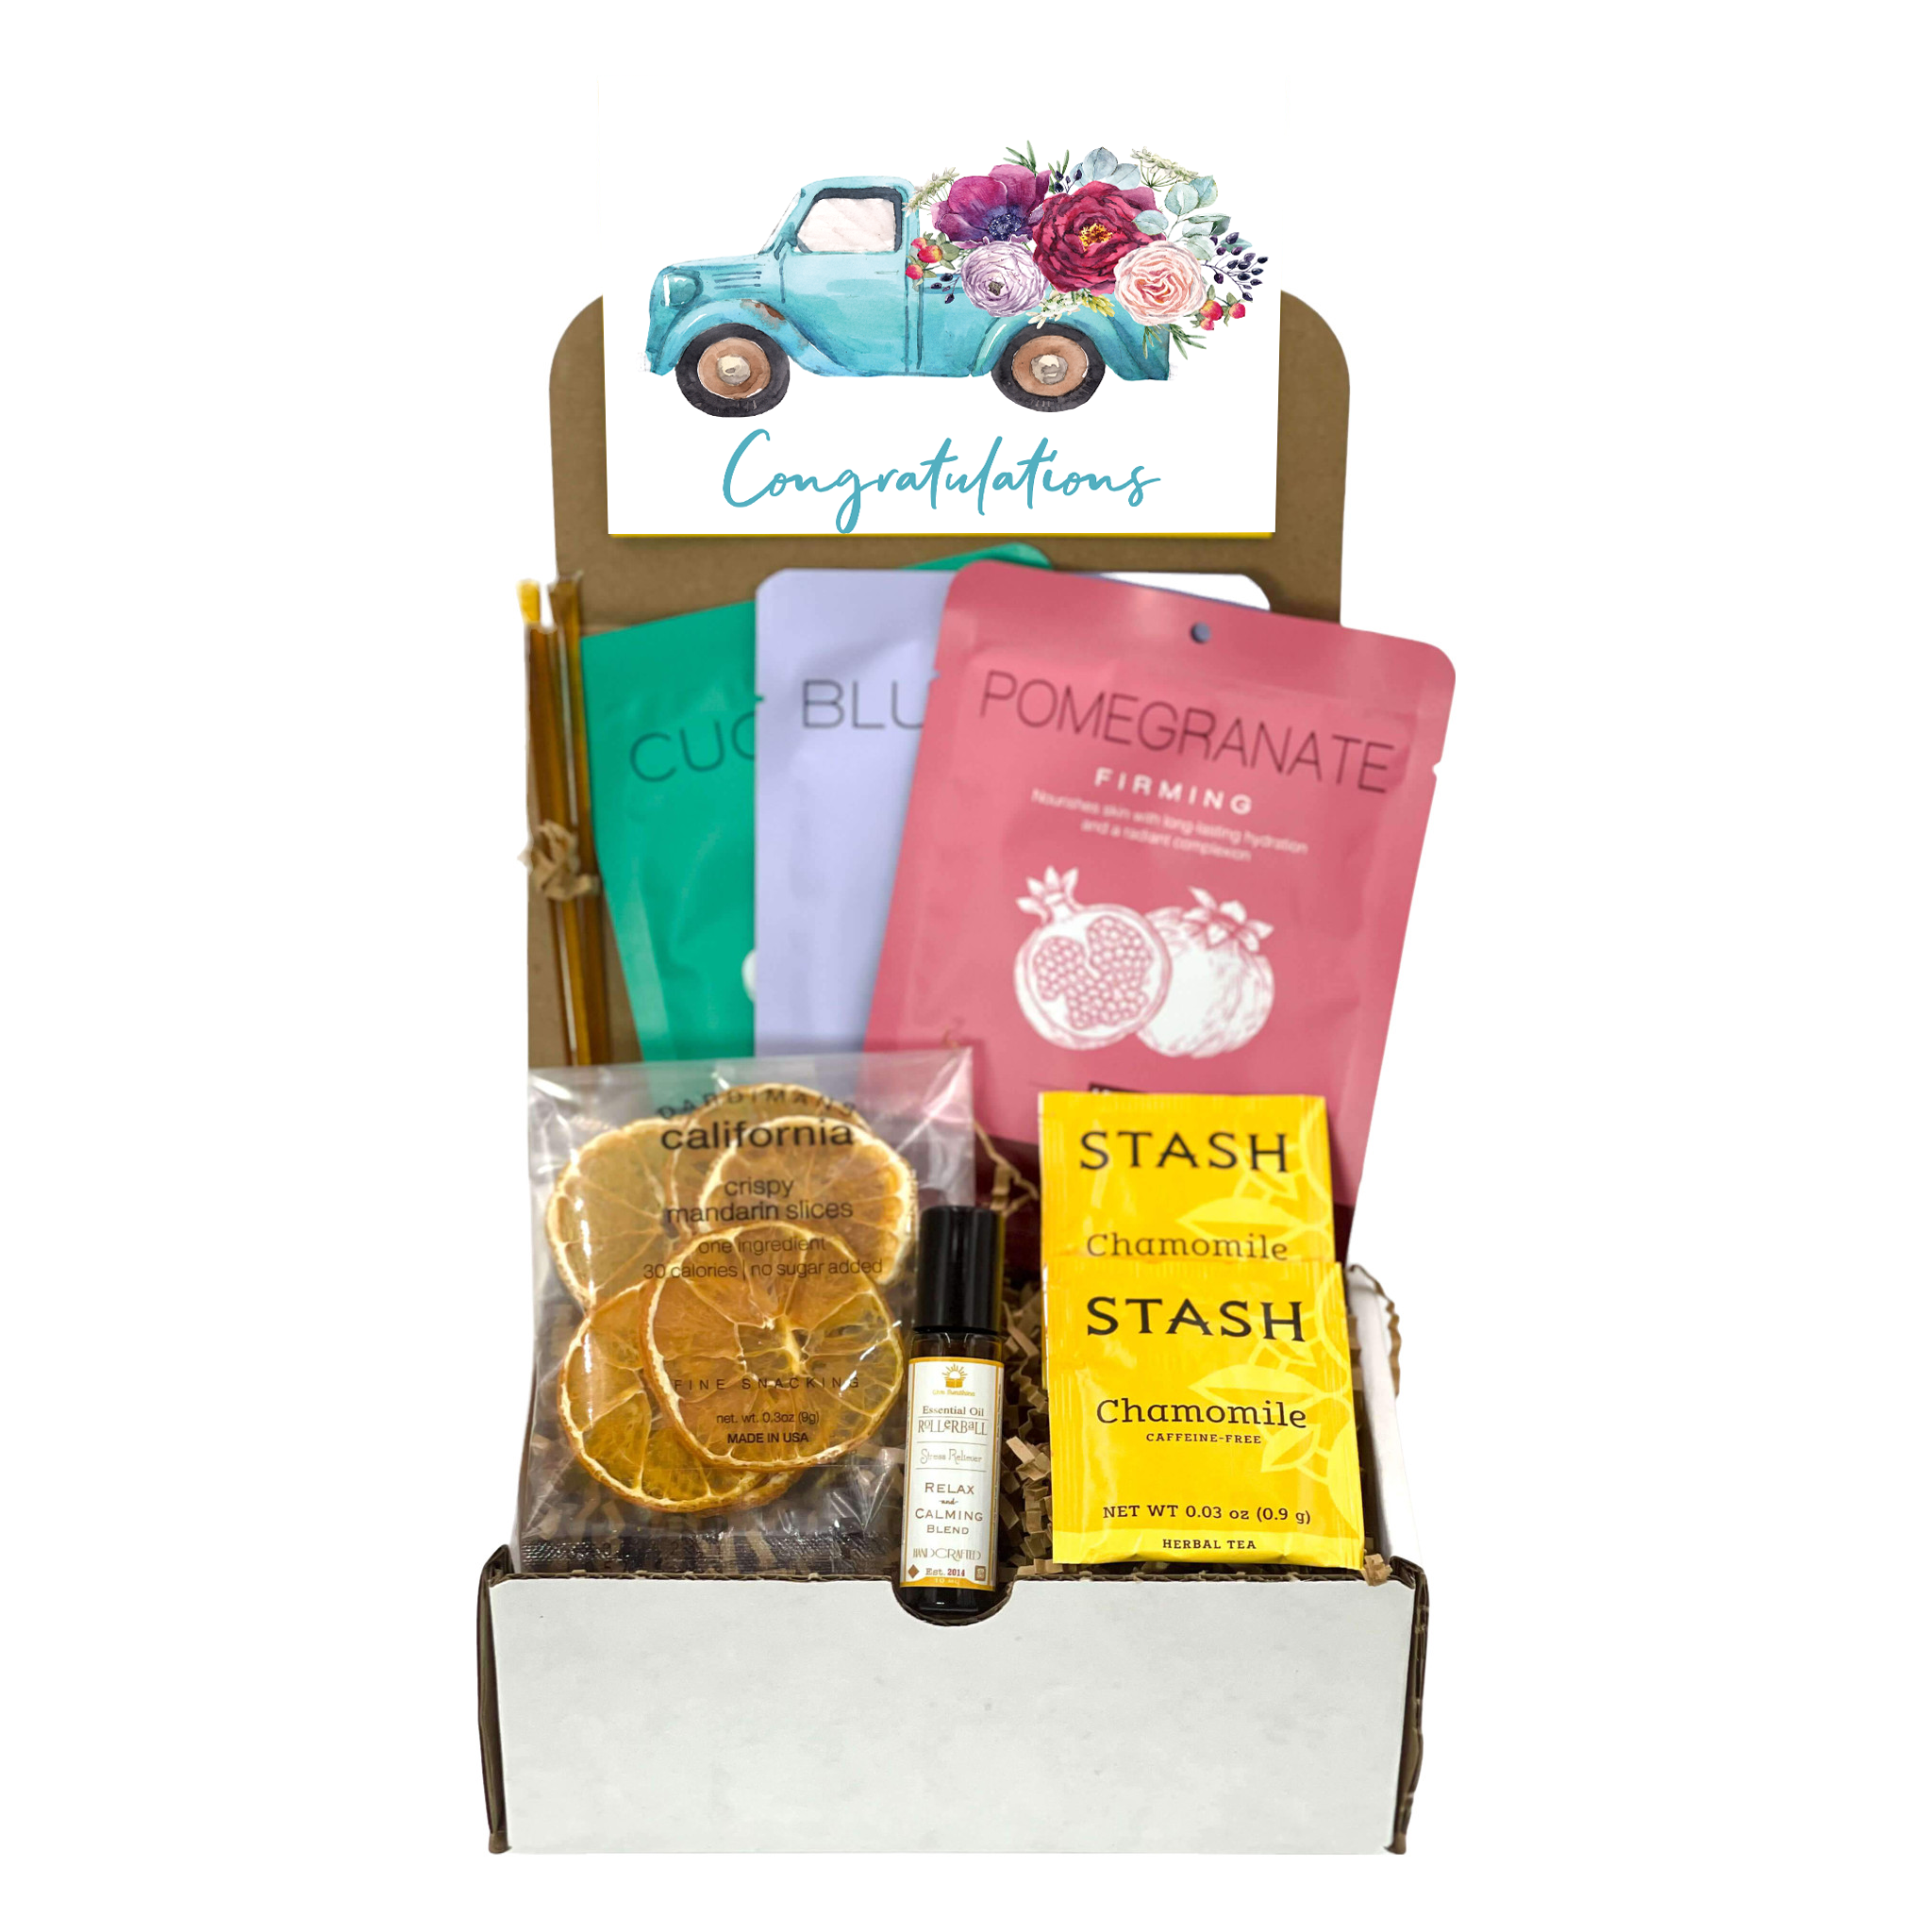 PAMPER & TREAT Gift Hampers For Women - All Occasion Gifts for Her Handmade  in the UK by 6 Small Businesses: Shower Steamers, Candle, Bath Bomb & More  - Best Gift Ideas